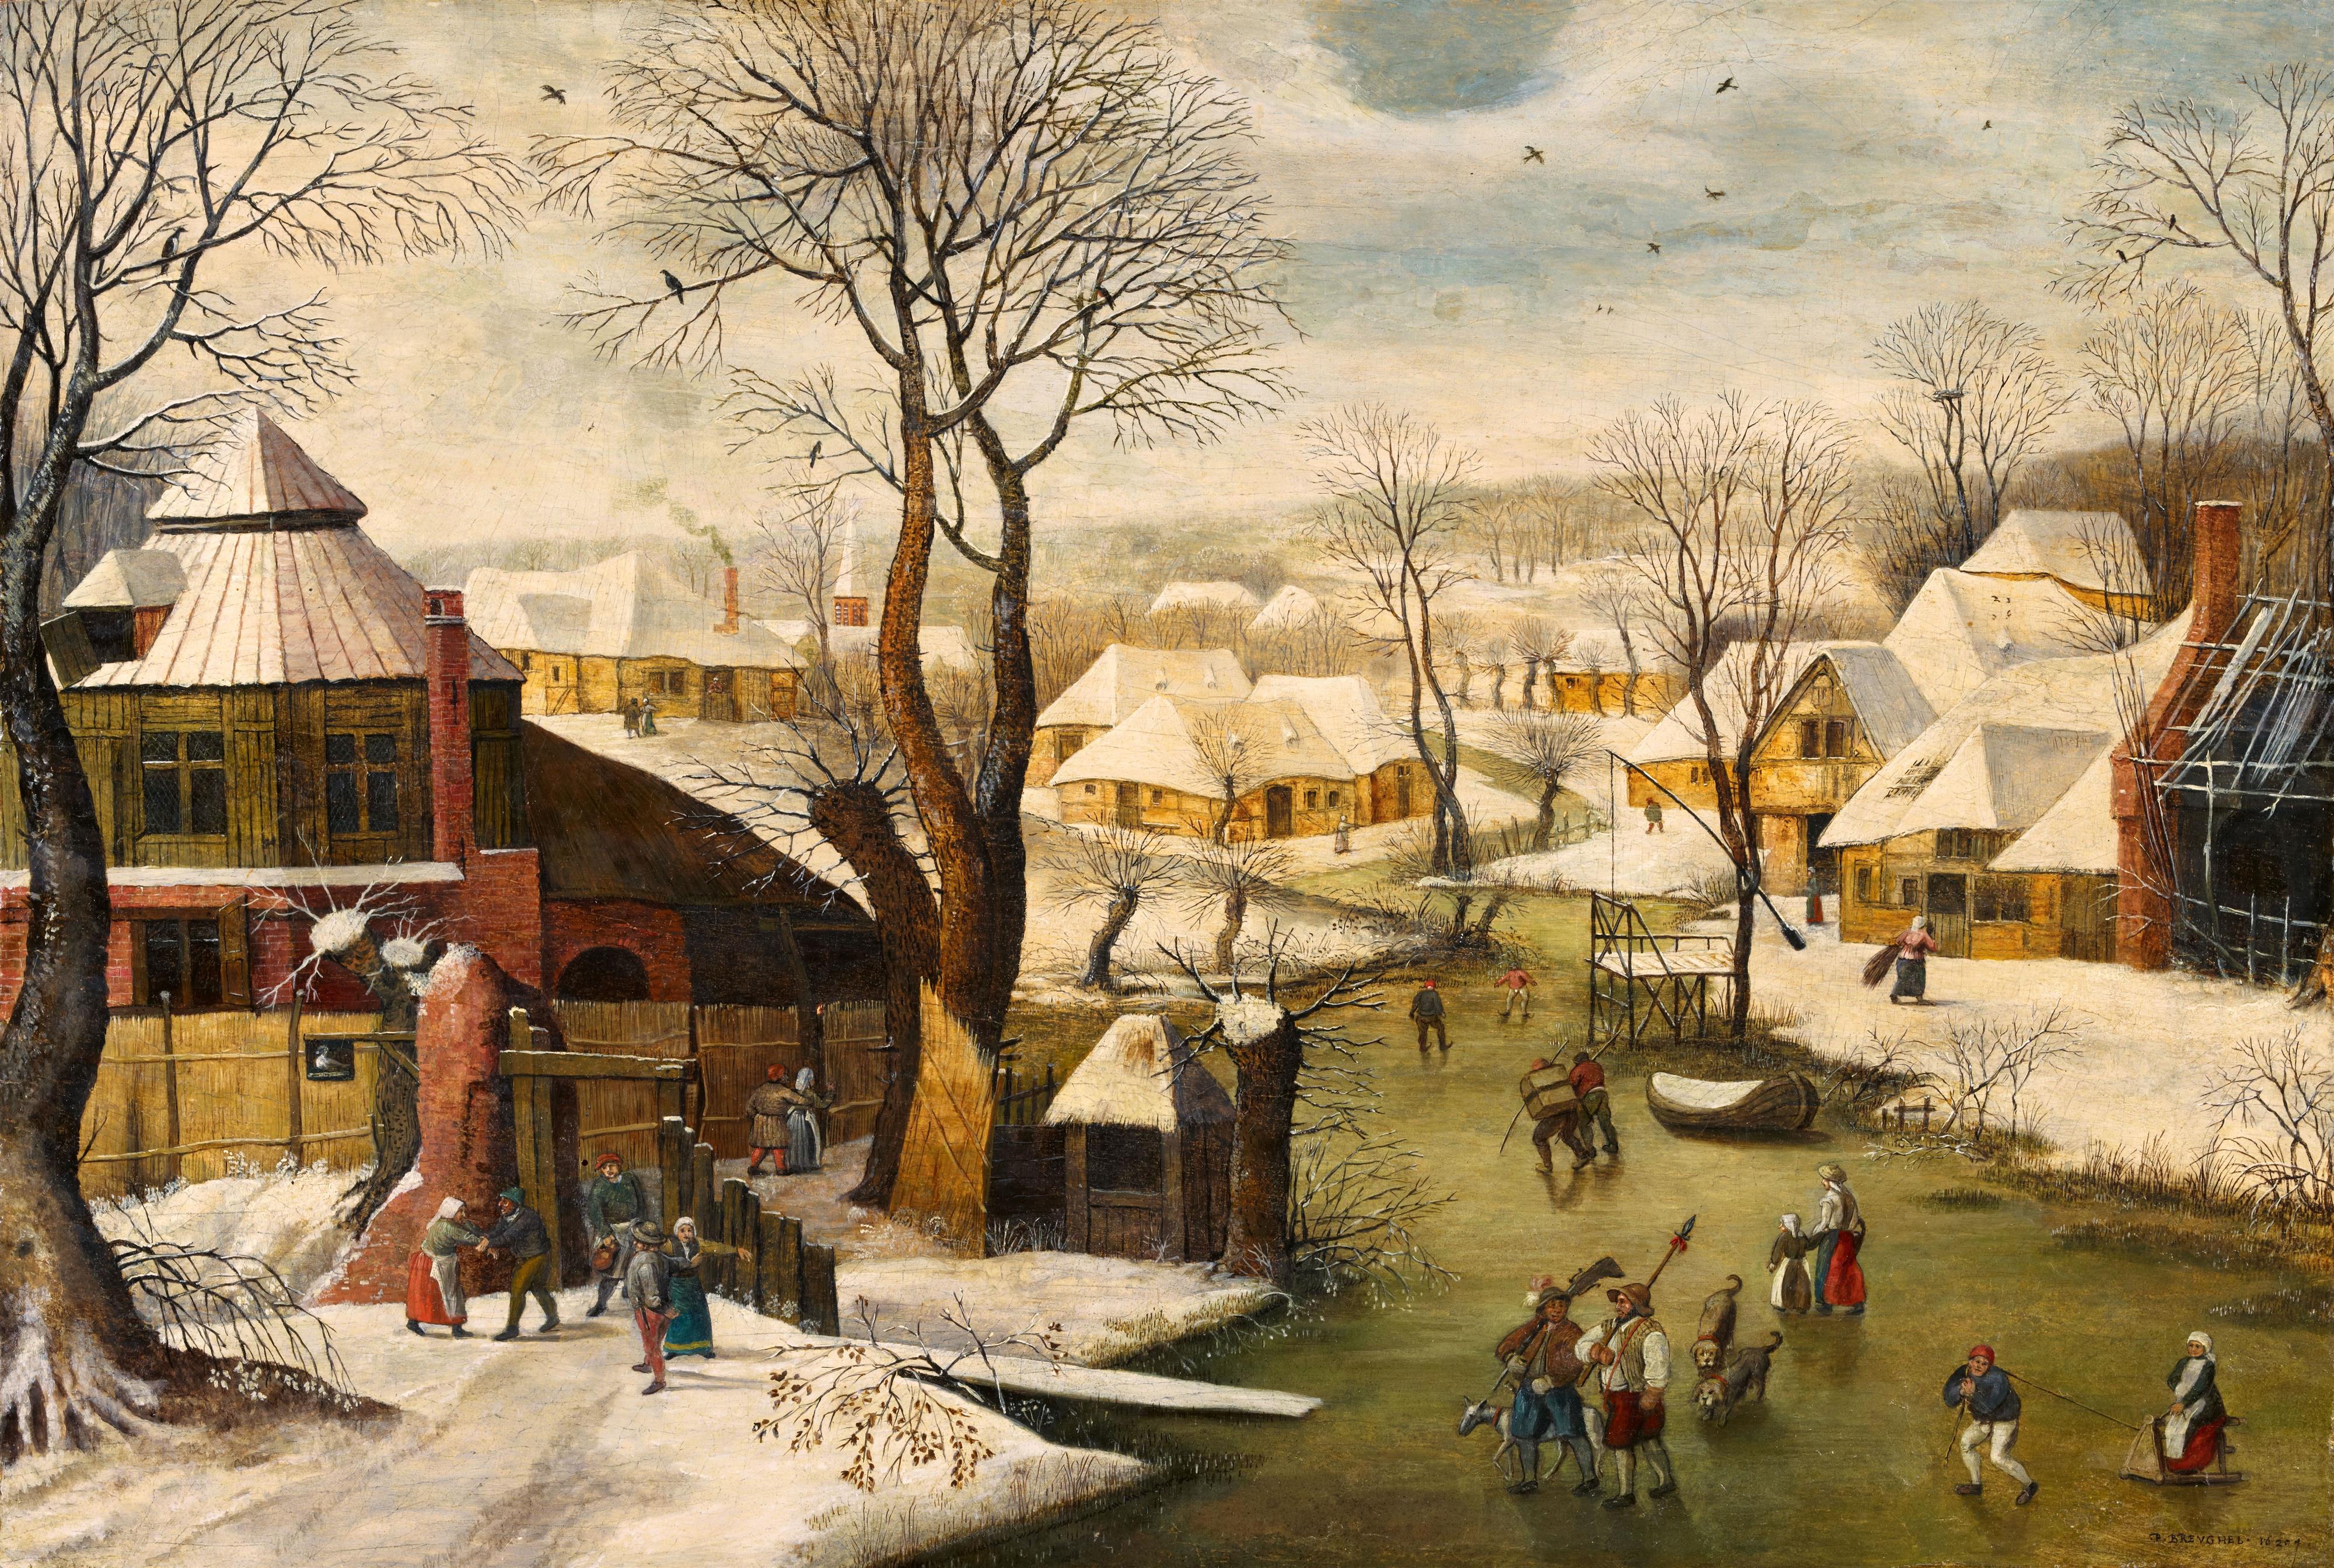 Pieter Brueghel the Younger - Winter Village Landscape with "The Swan" Tavern - image-1